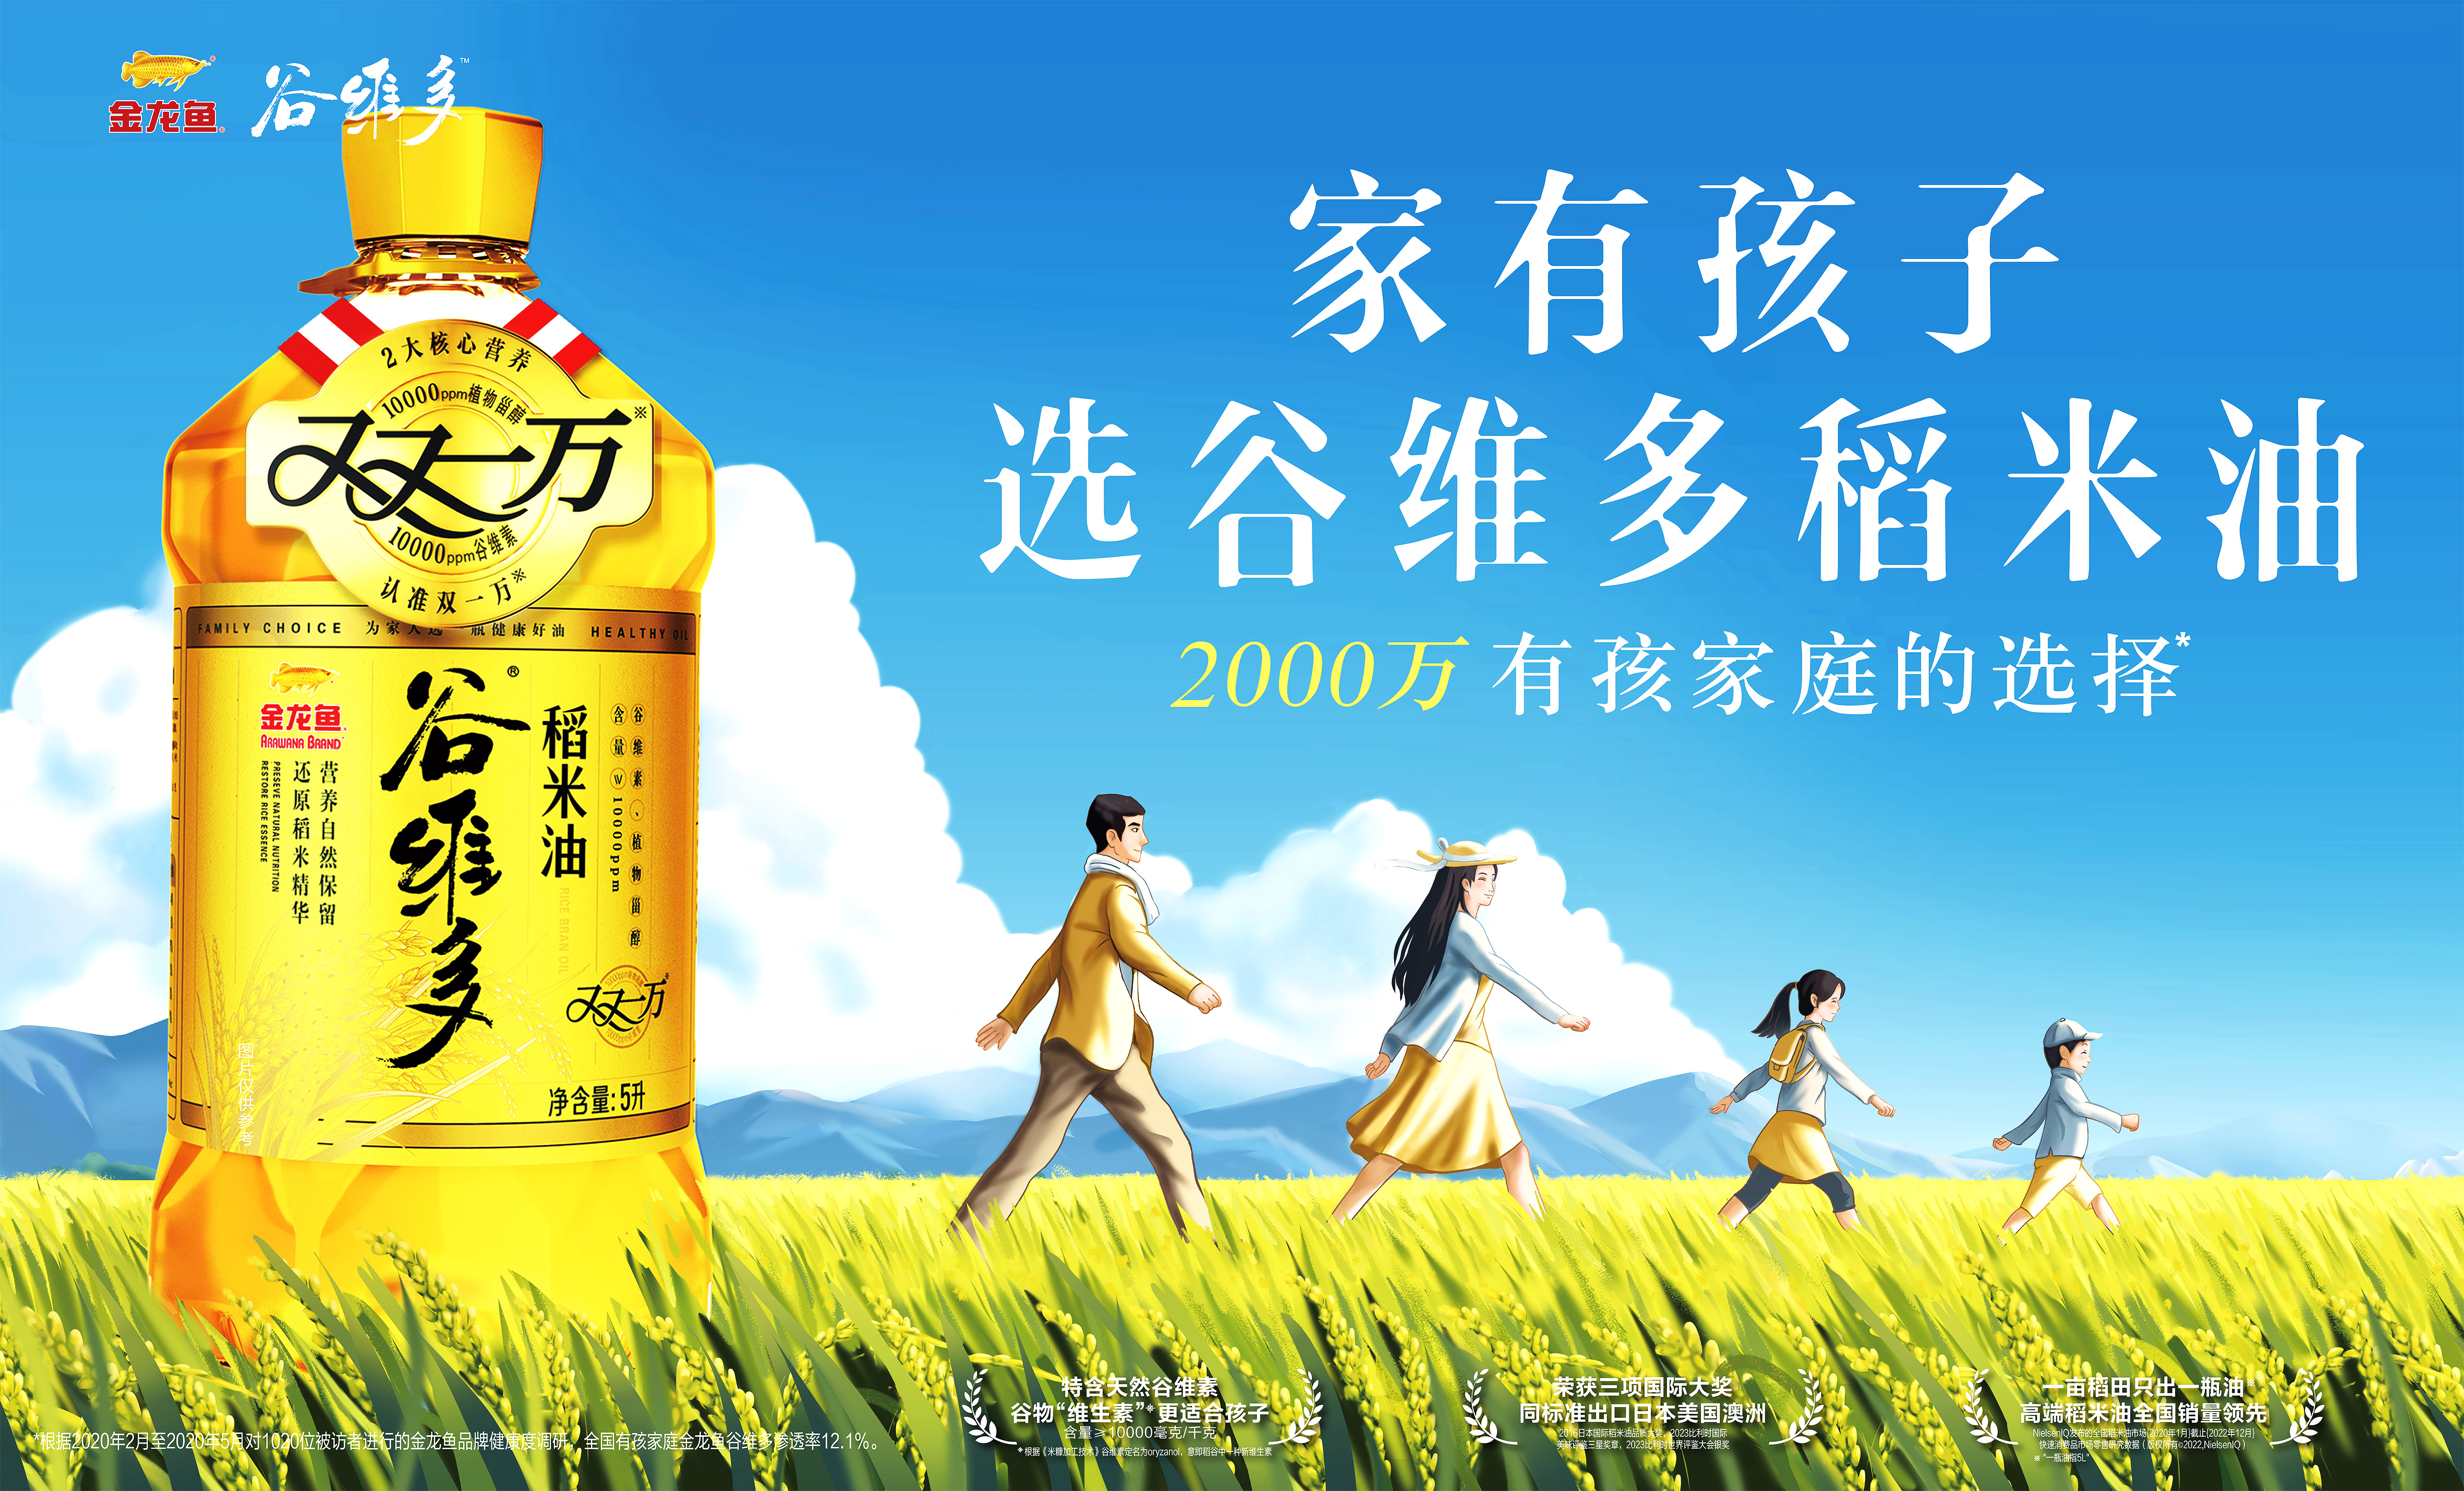 Gu Weiduo repositions, with rice oil ranking first in sales for eight consecutive years